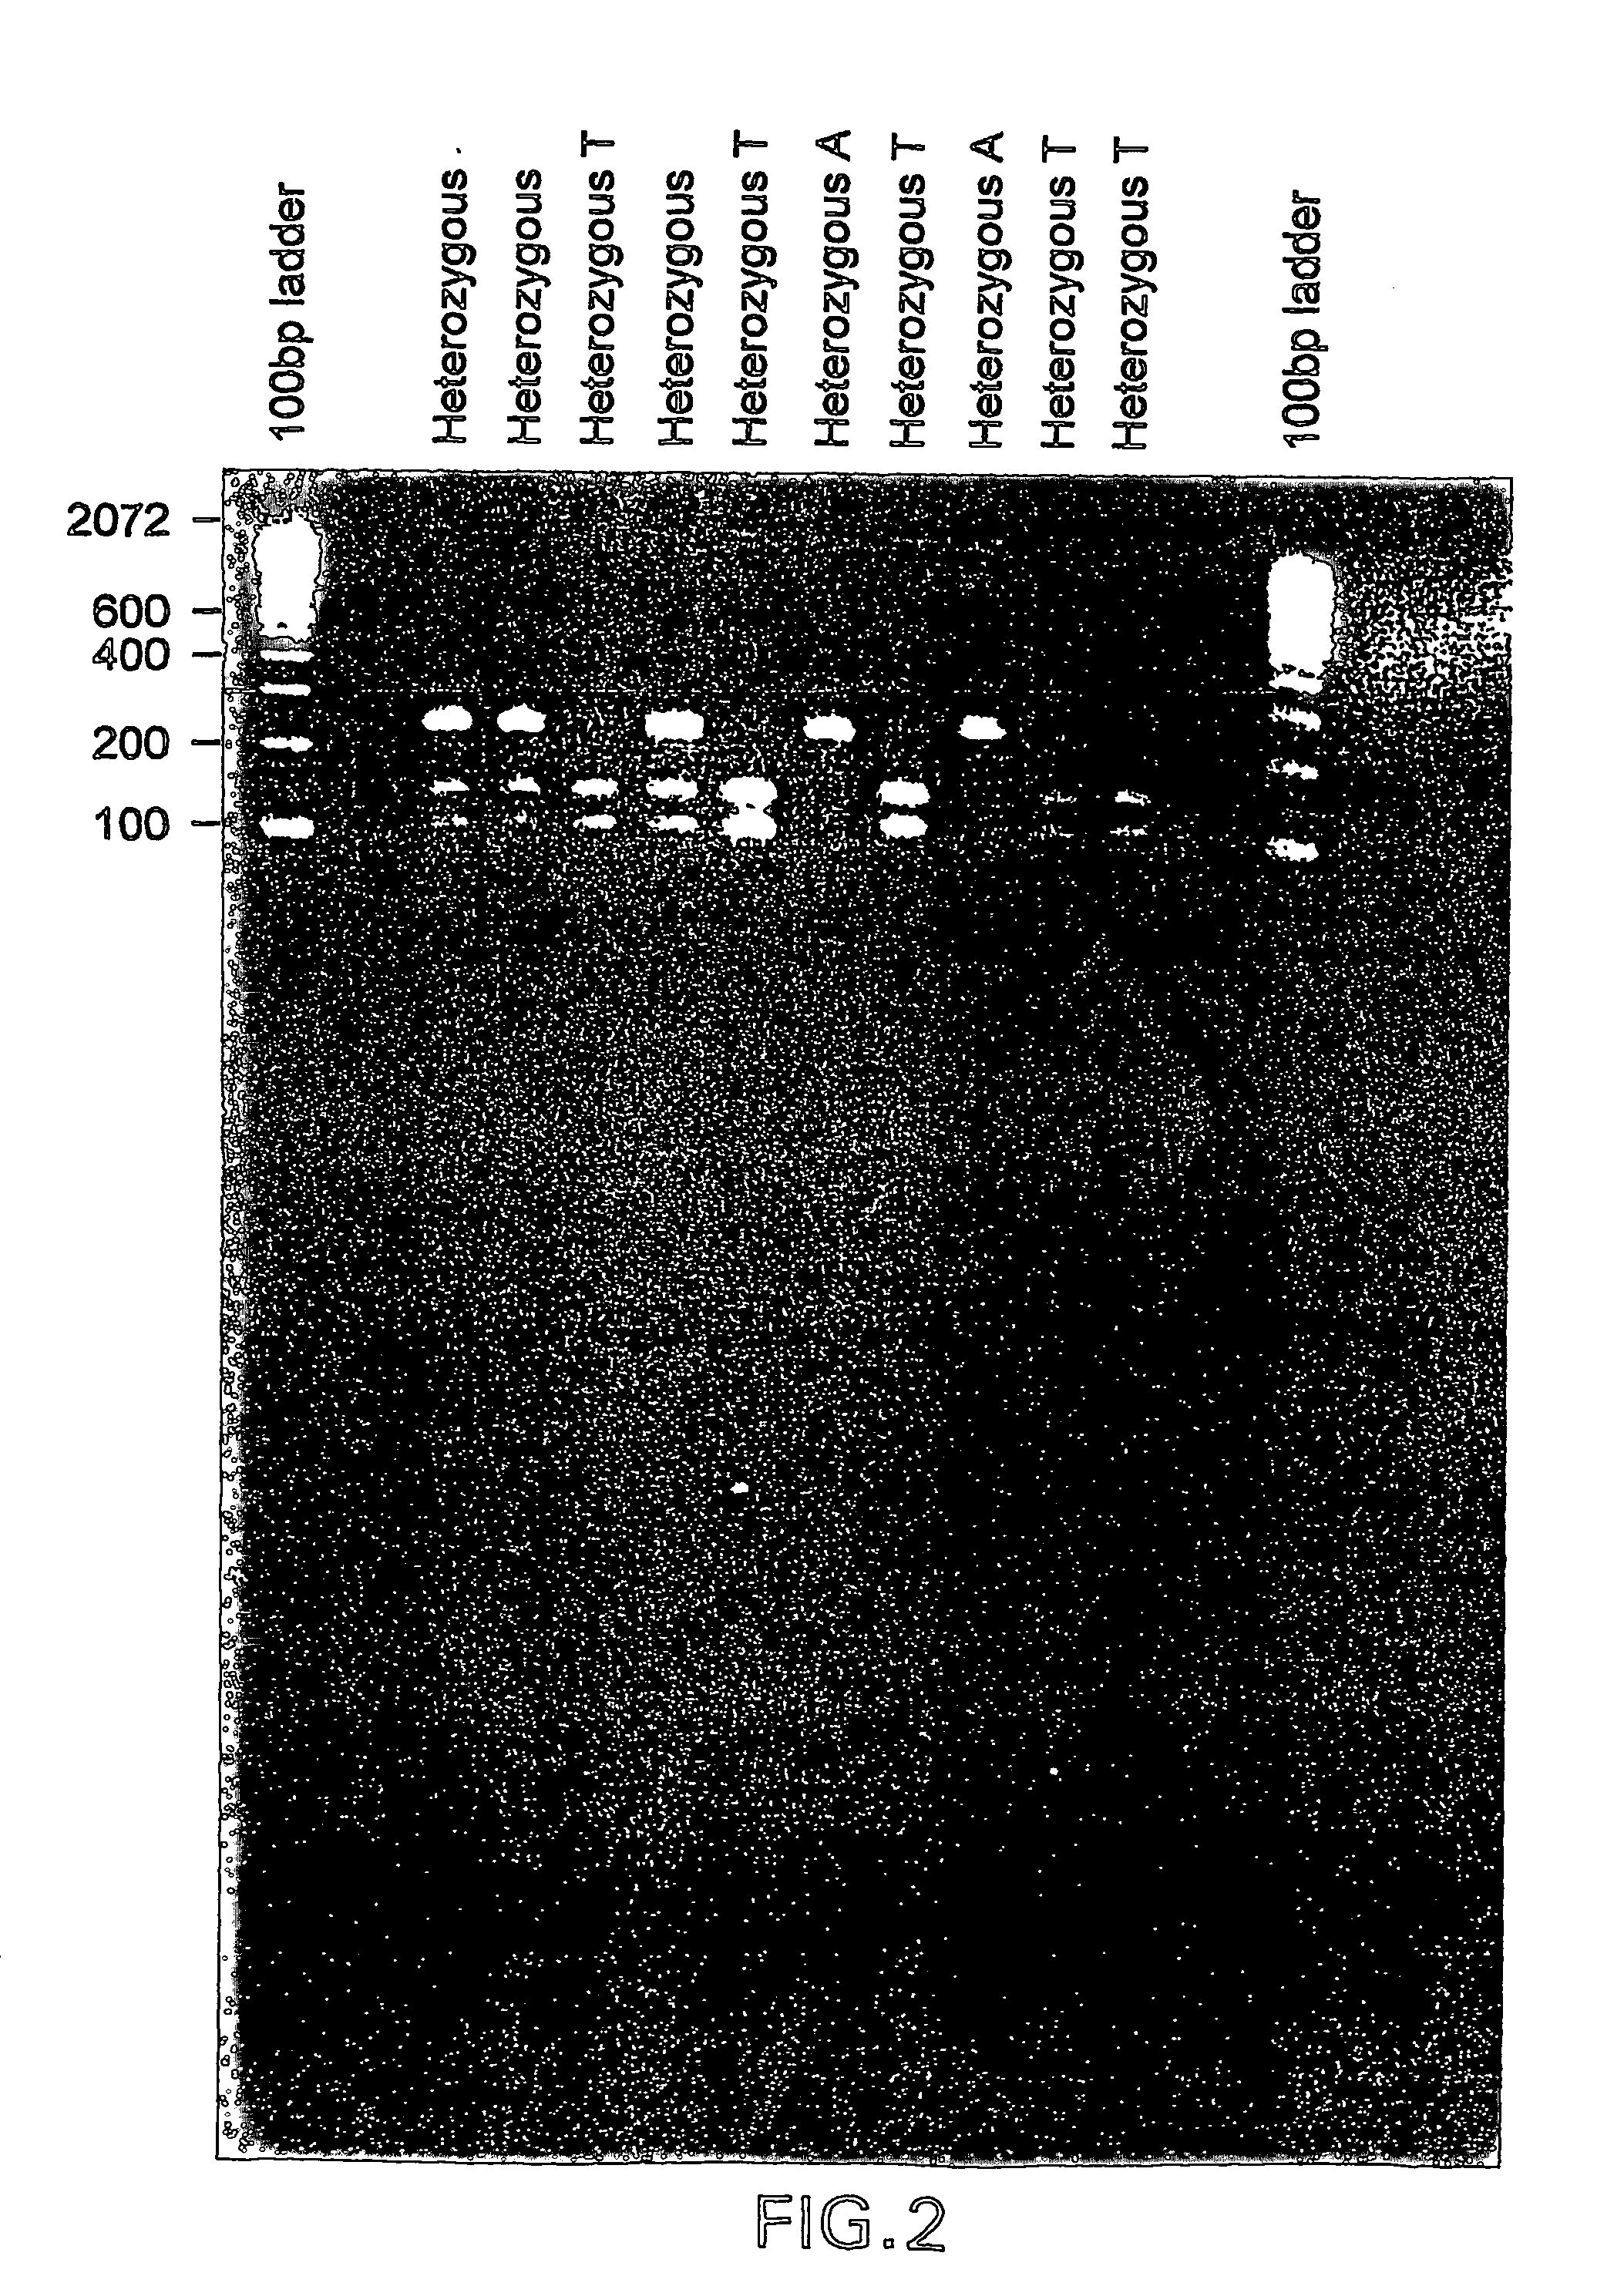 Identification of novel polymorphic sites in the human mglur8 gene and uses thereof